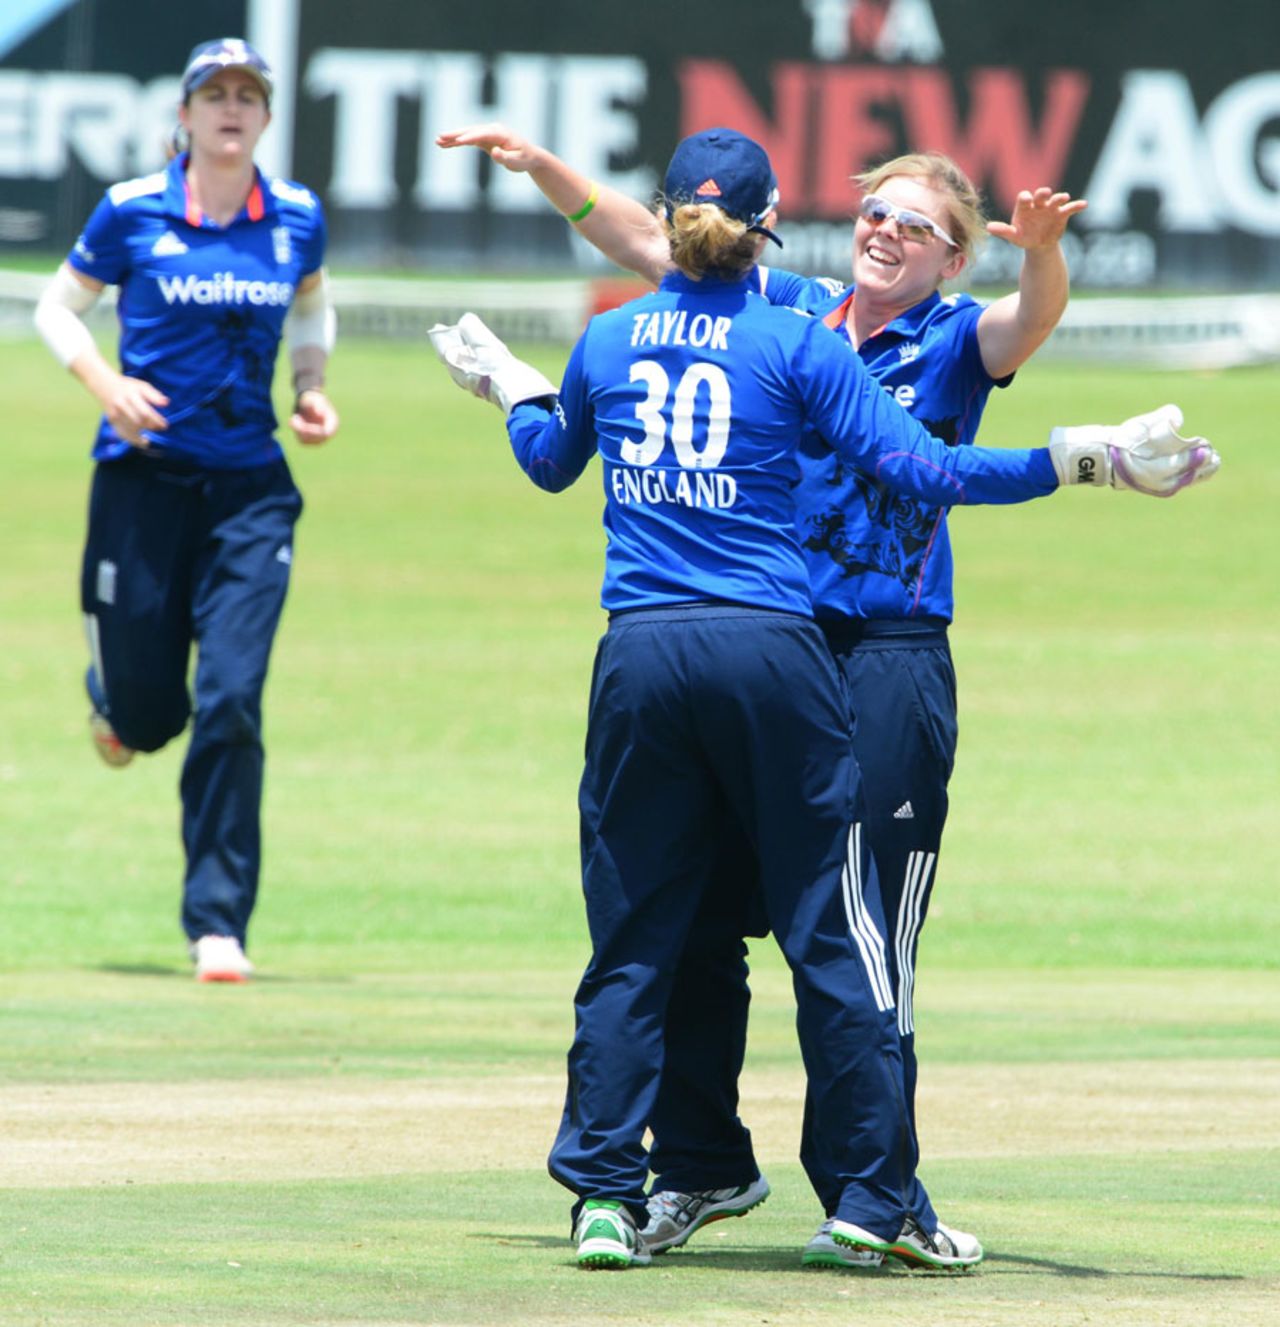 Heather Knight claimed 2 for 42, South Africa v England, 1st women's ODI, Benoni, February 7, 2016